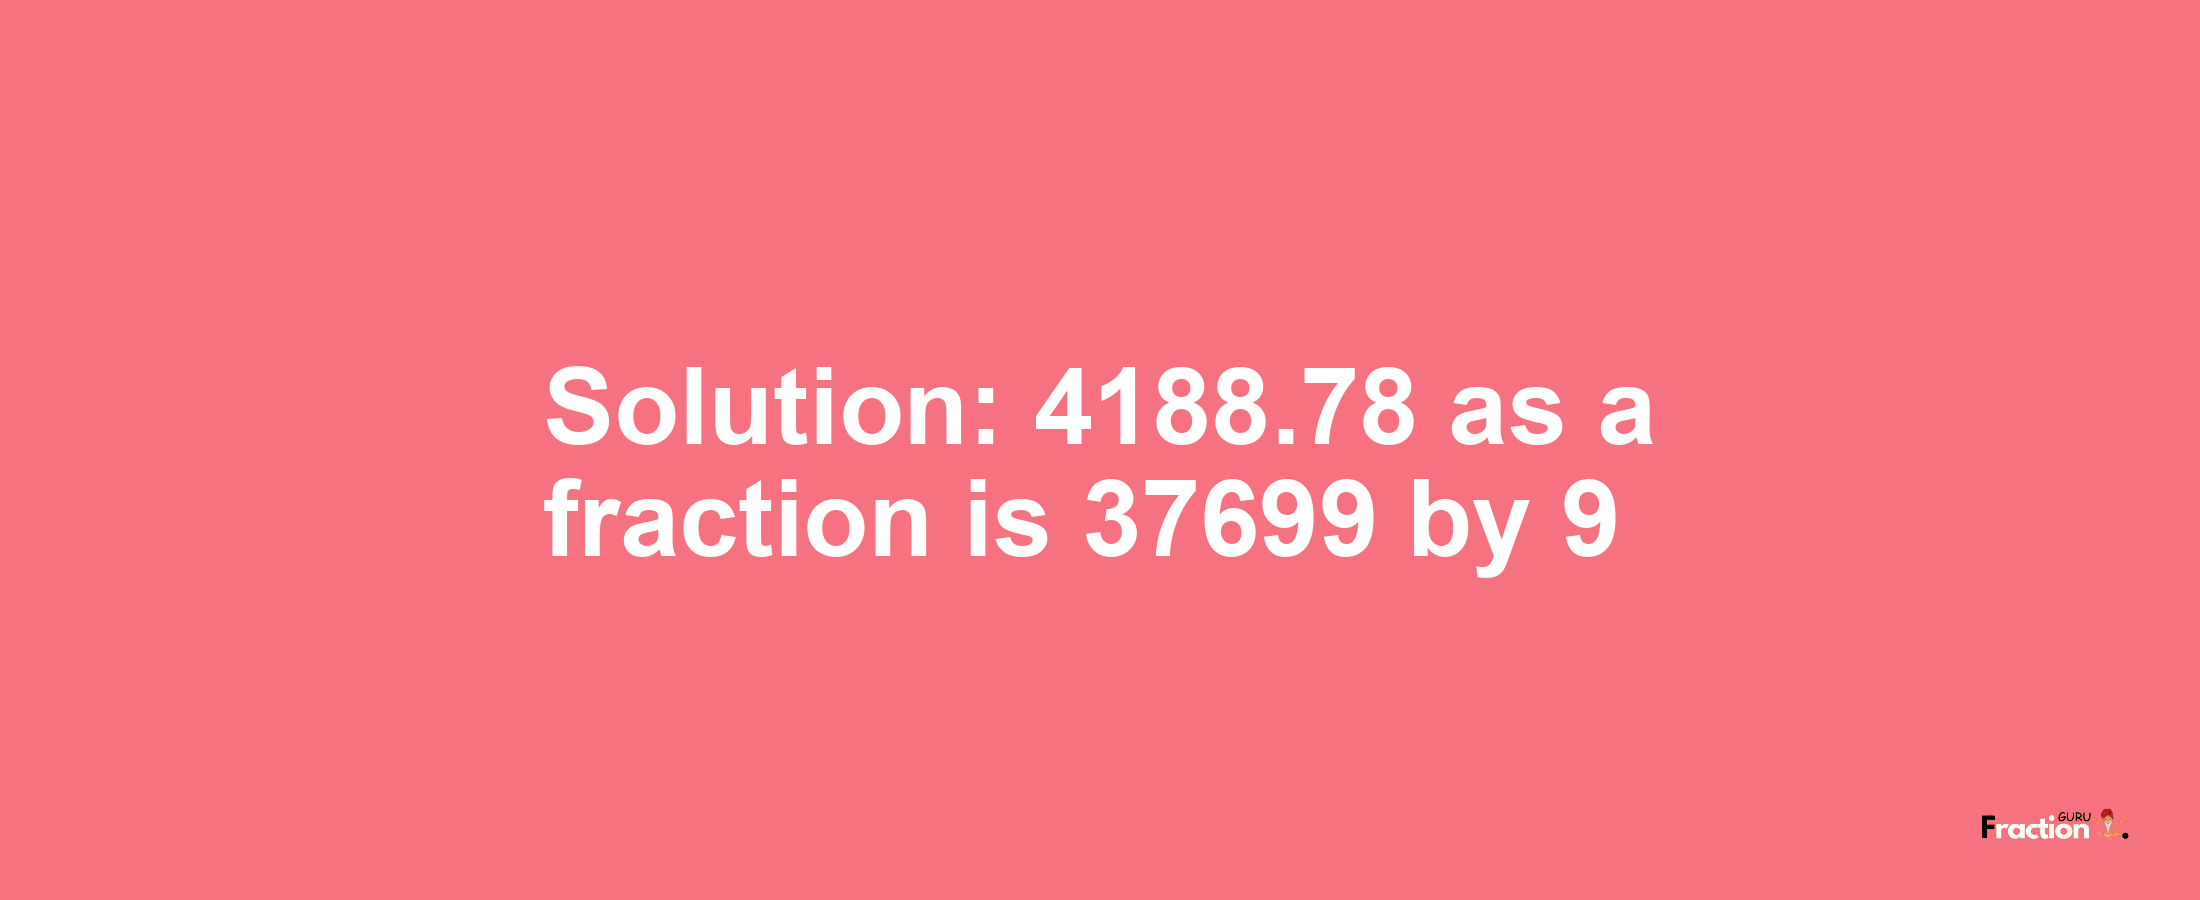 Solution:4188.78 as a fraction is 37699/9